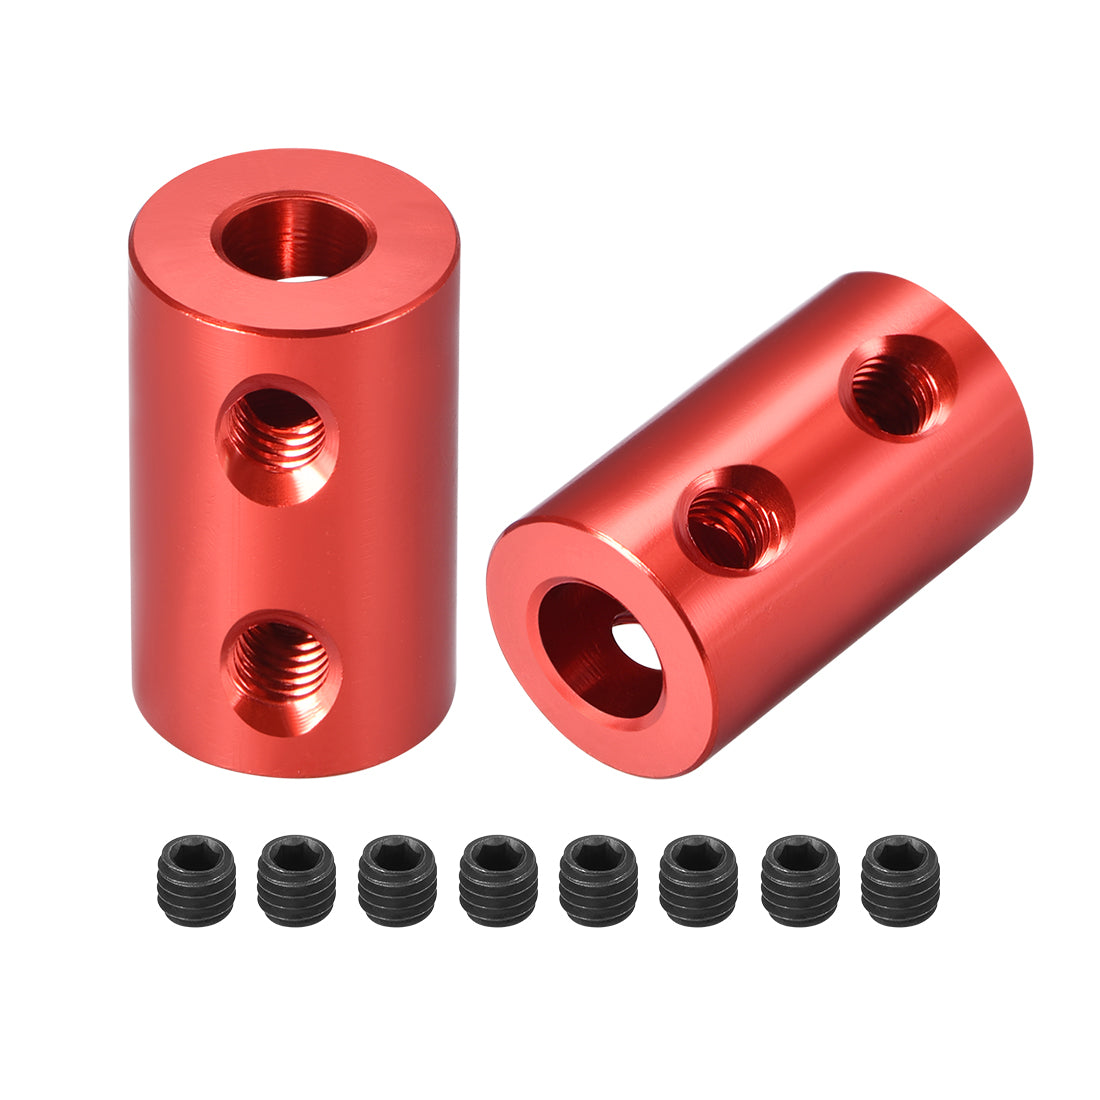 uxcell Uxcell Shaft Coupling 5mm to 6mm Bore L20xD12 Robot Motor Wheel Rigid Coupler Connector Red 2 PCS